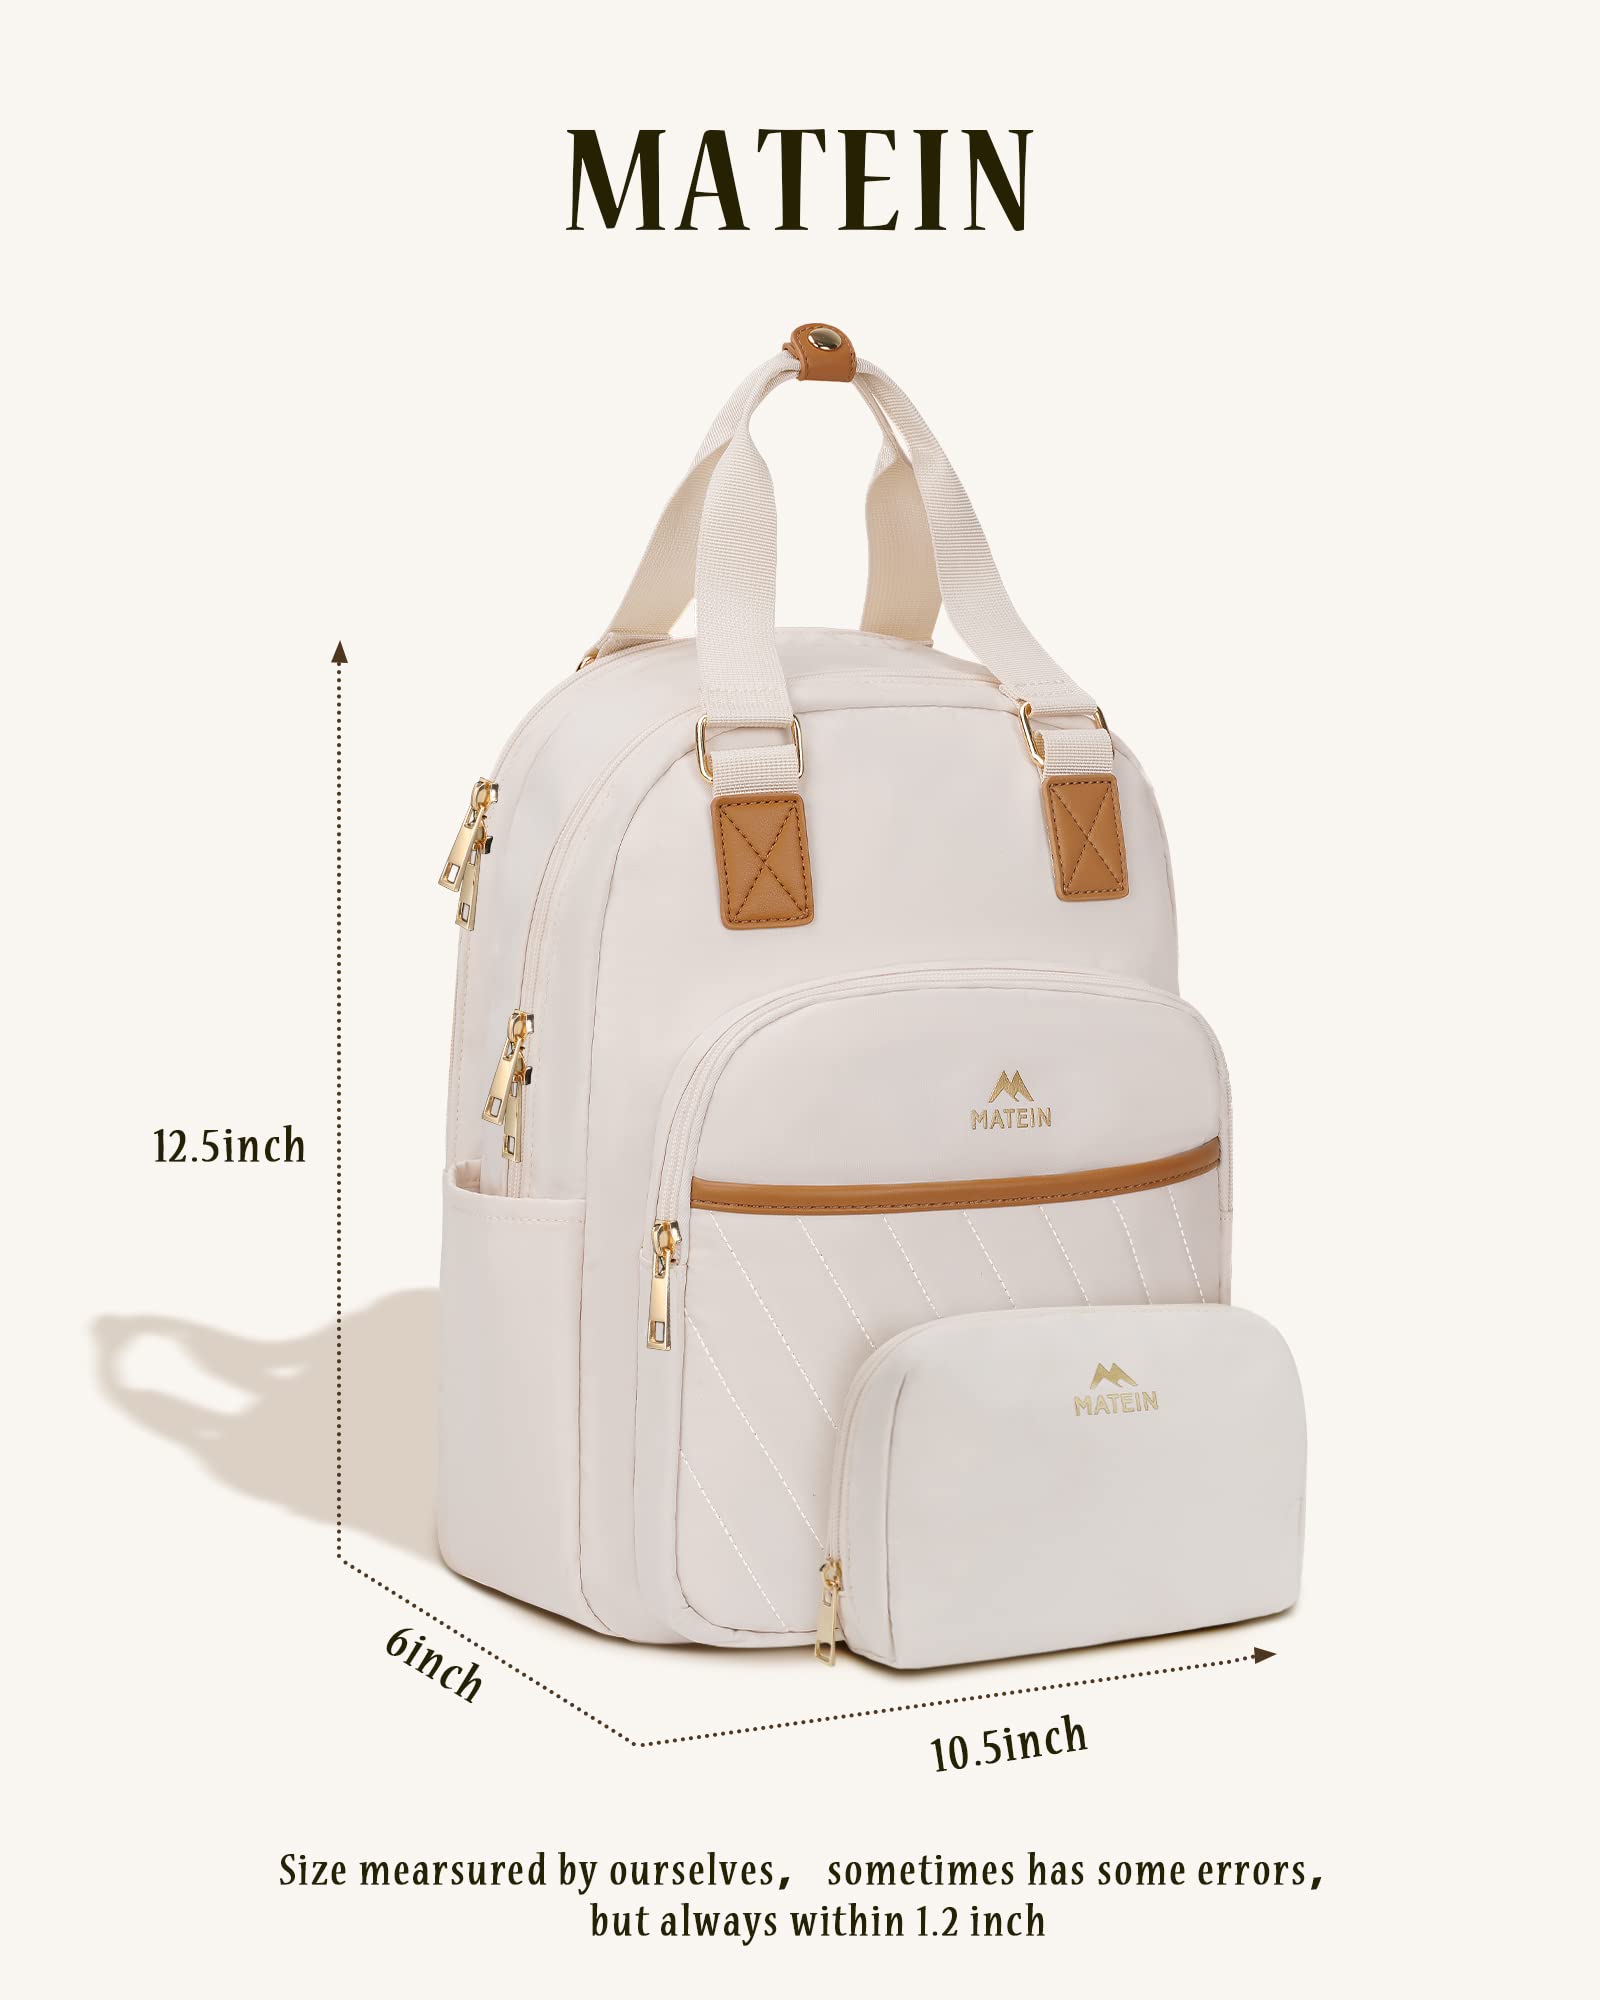 MATEIN Small Backpack Purse for Women, Cute Lightweight Laptop Daypack with Makeup Bag & USB port, Fashion Mini Waterproof Casual Shoulder Bag for College Work Travel, Gift for Ladies，2pcs Sets, Beige